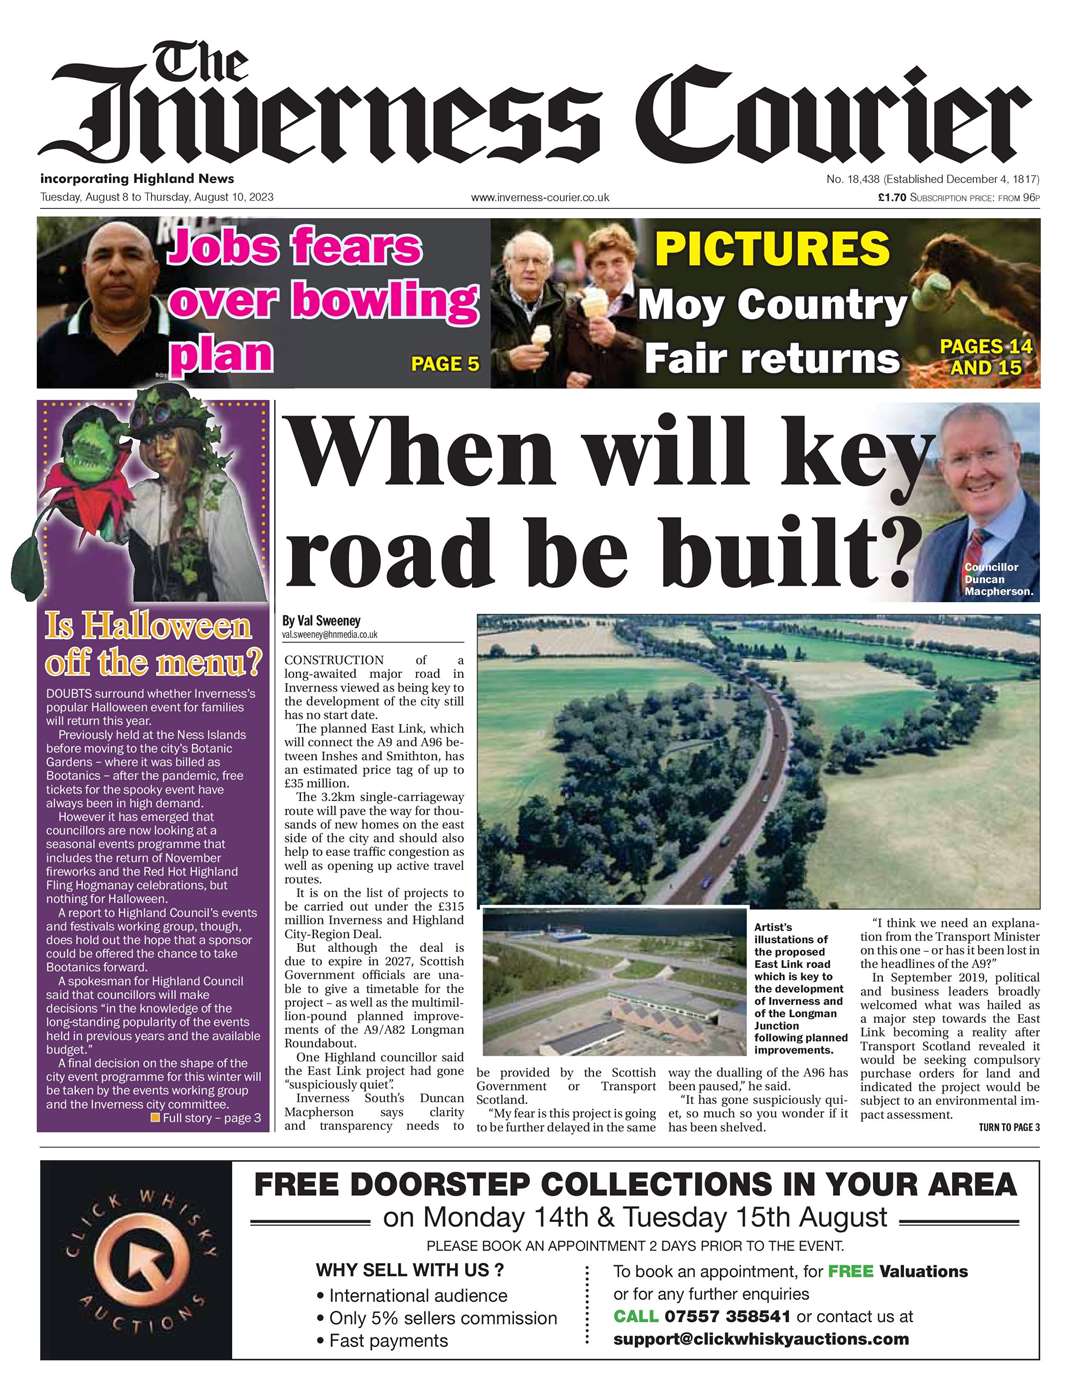 The Inverness Courier, August 8, front page.